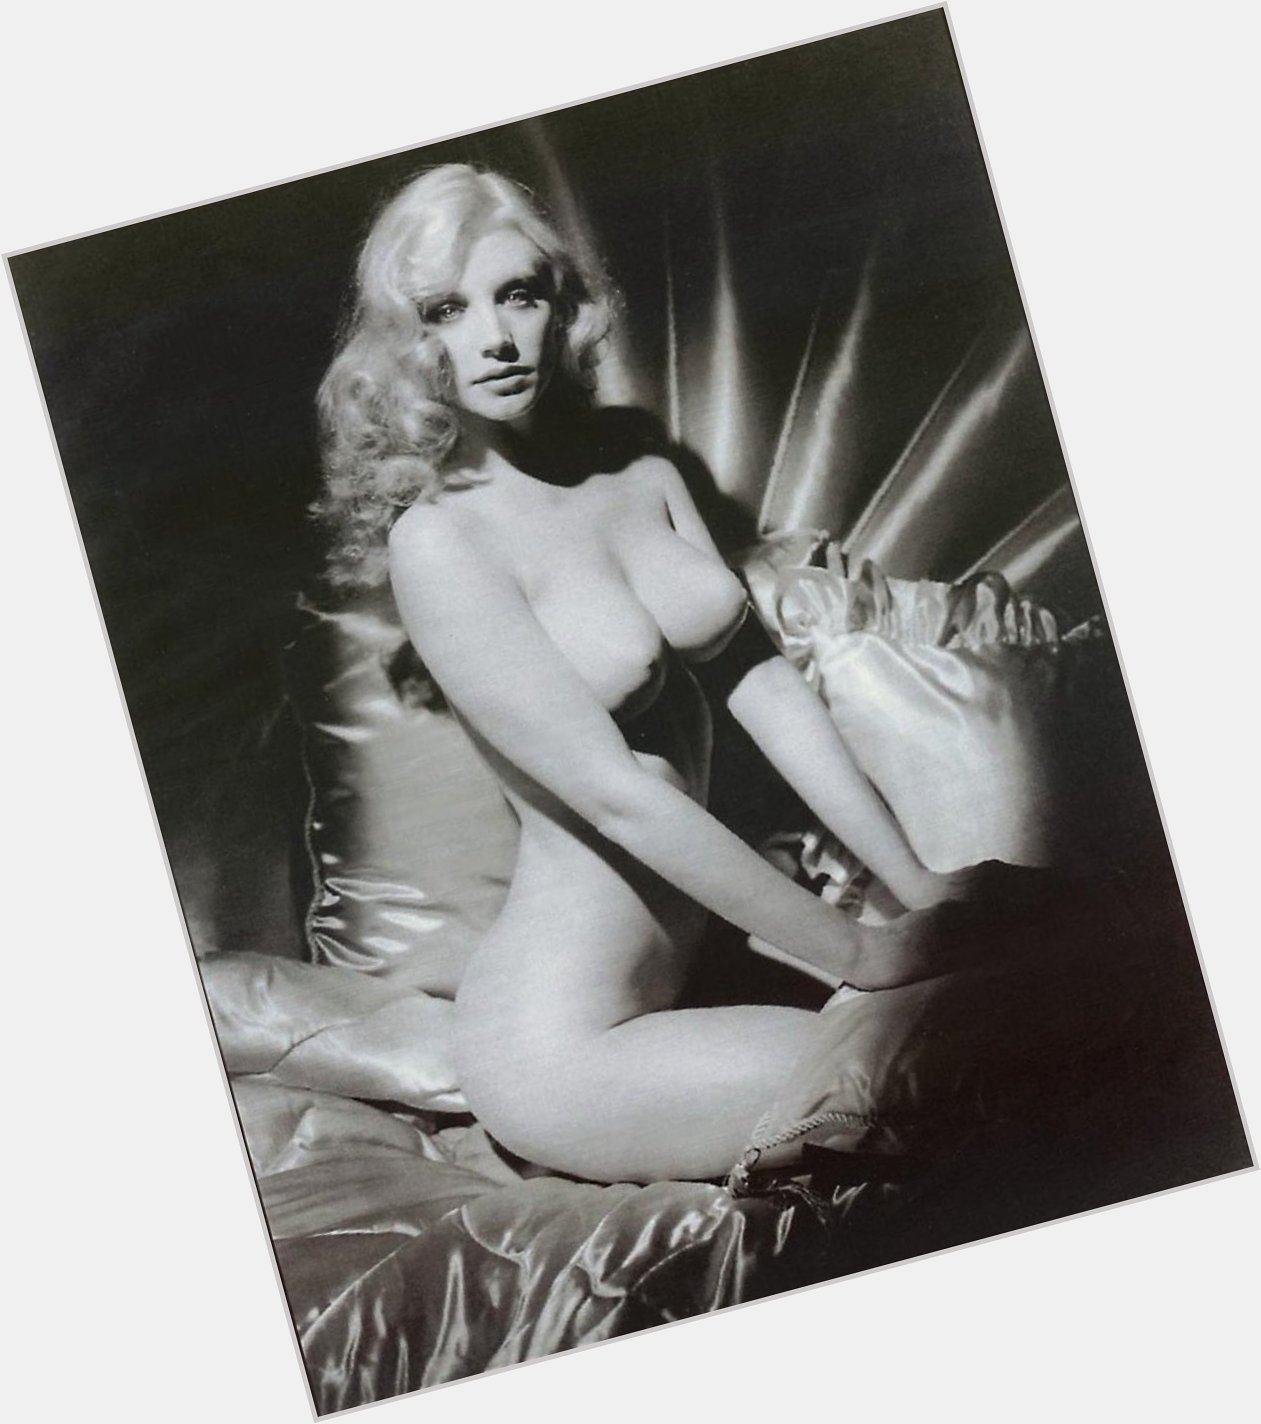 Happy birthday to the great Shannon Tweed seen here in her classic photos by George Hurrell: 